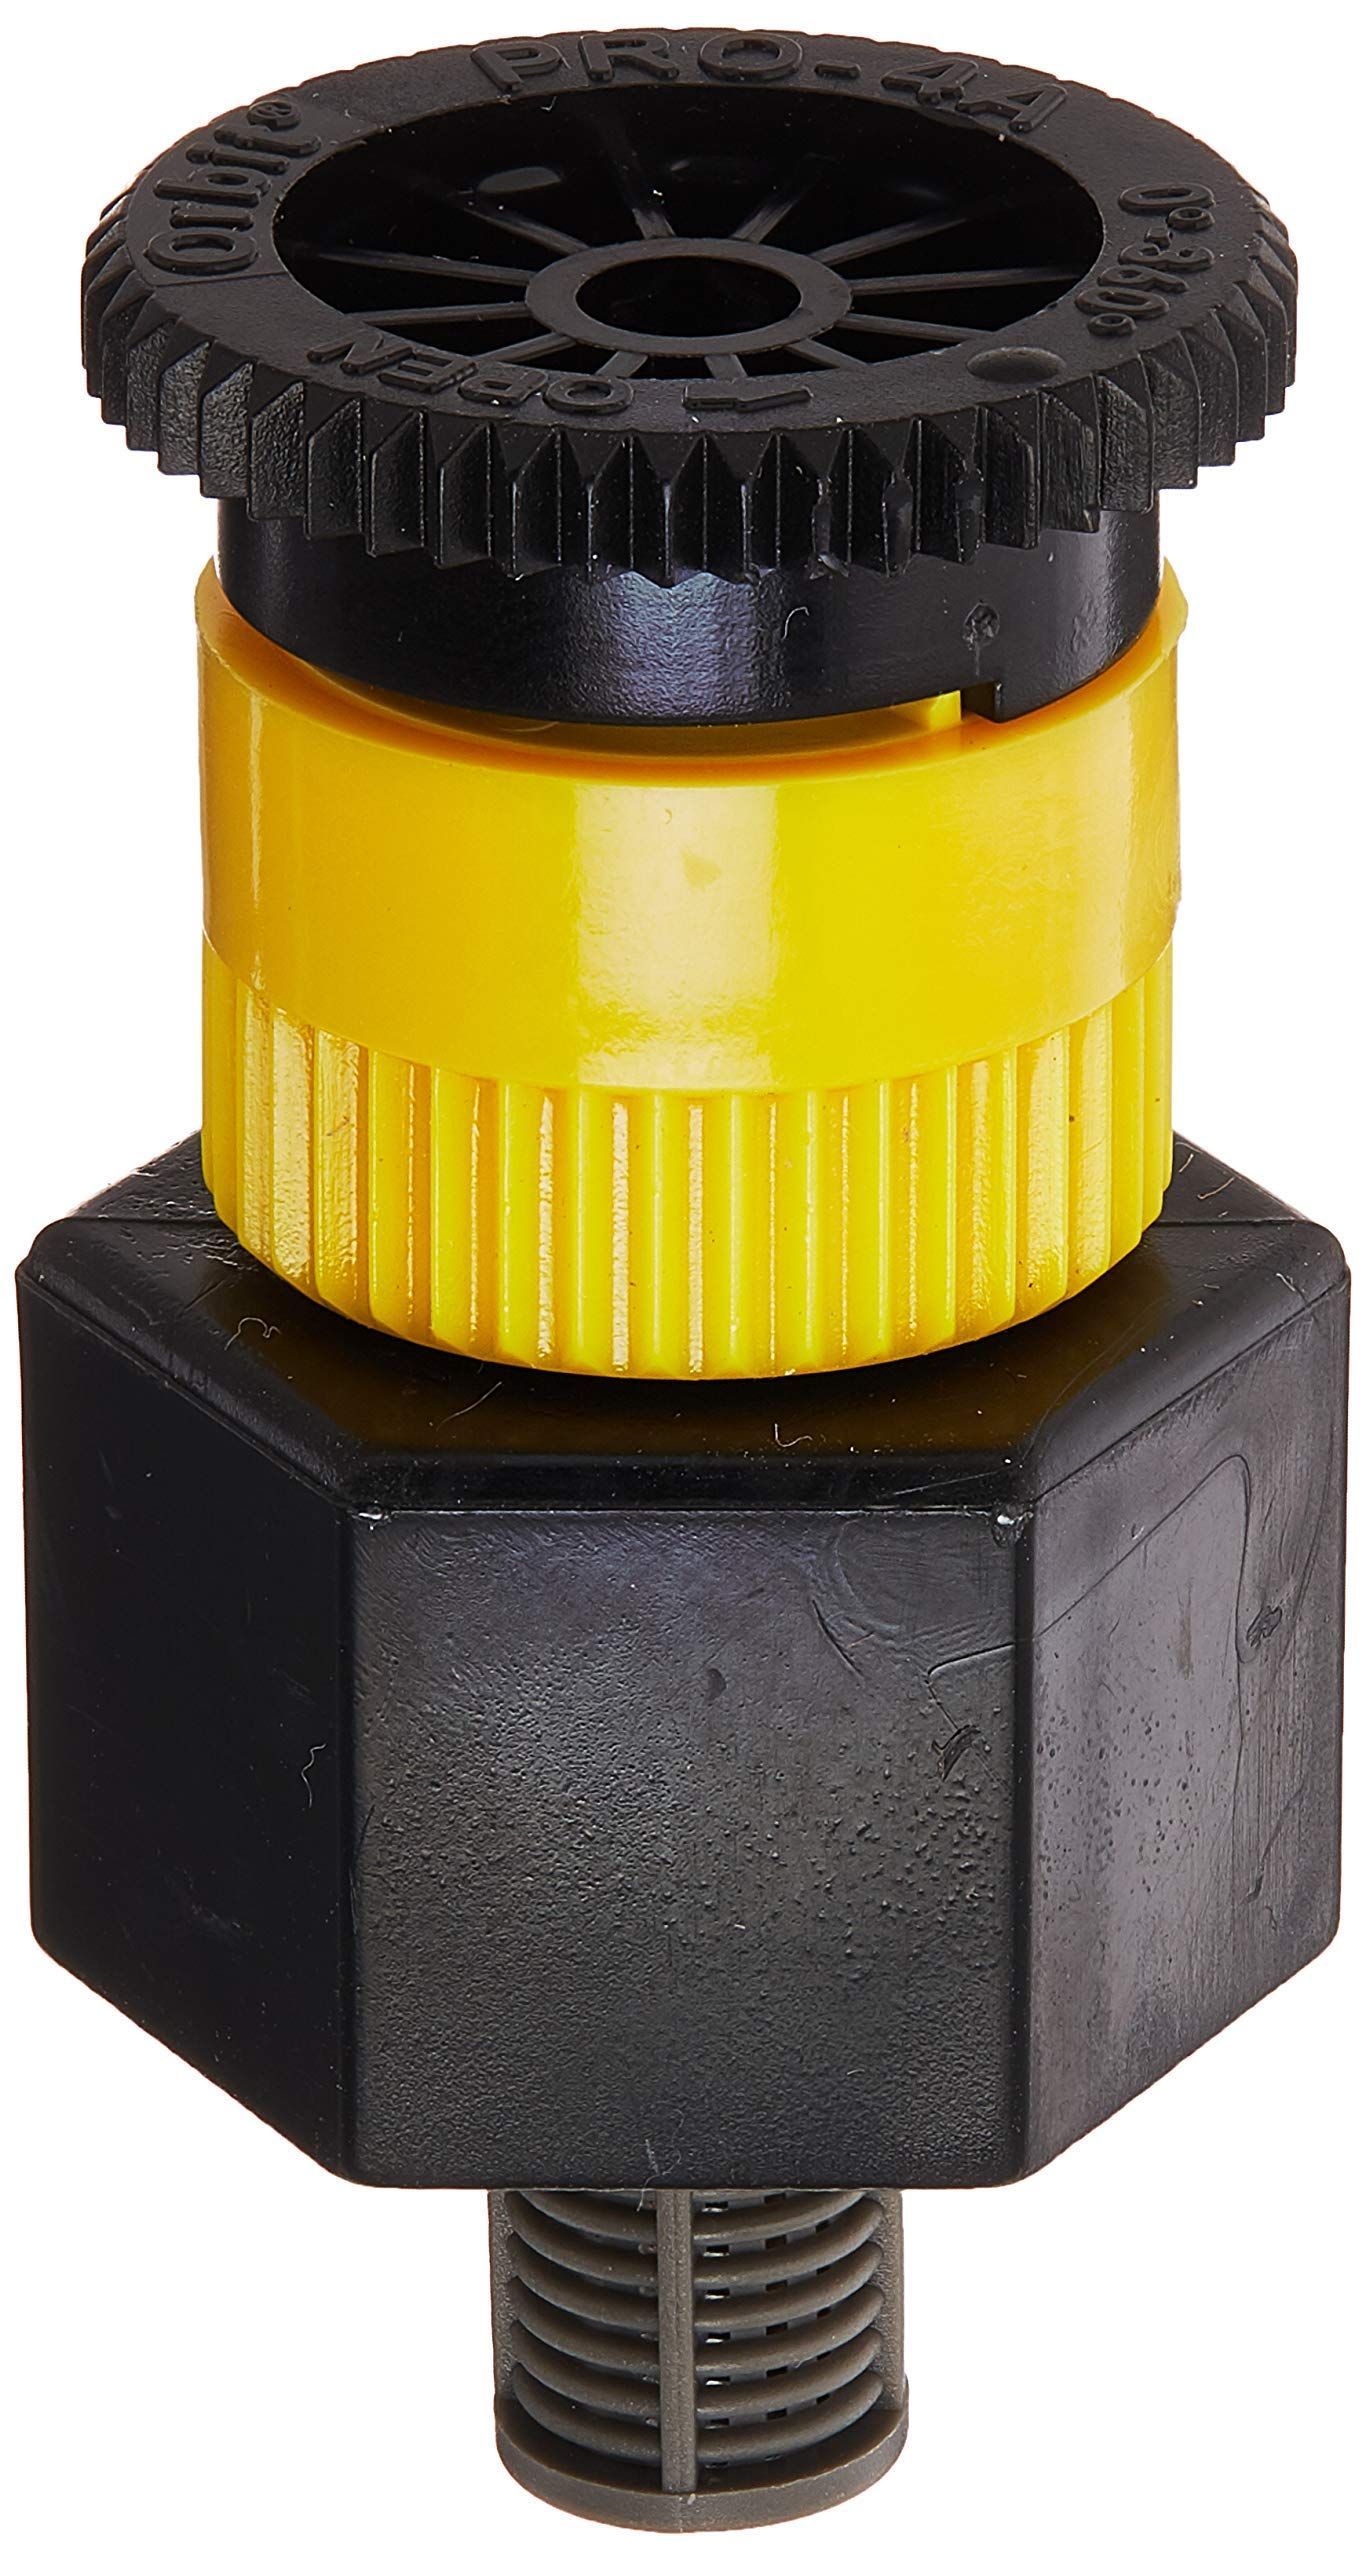 a close up of a yellow and black object that says ' sprinkler ' on it